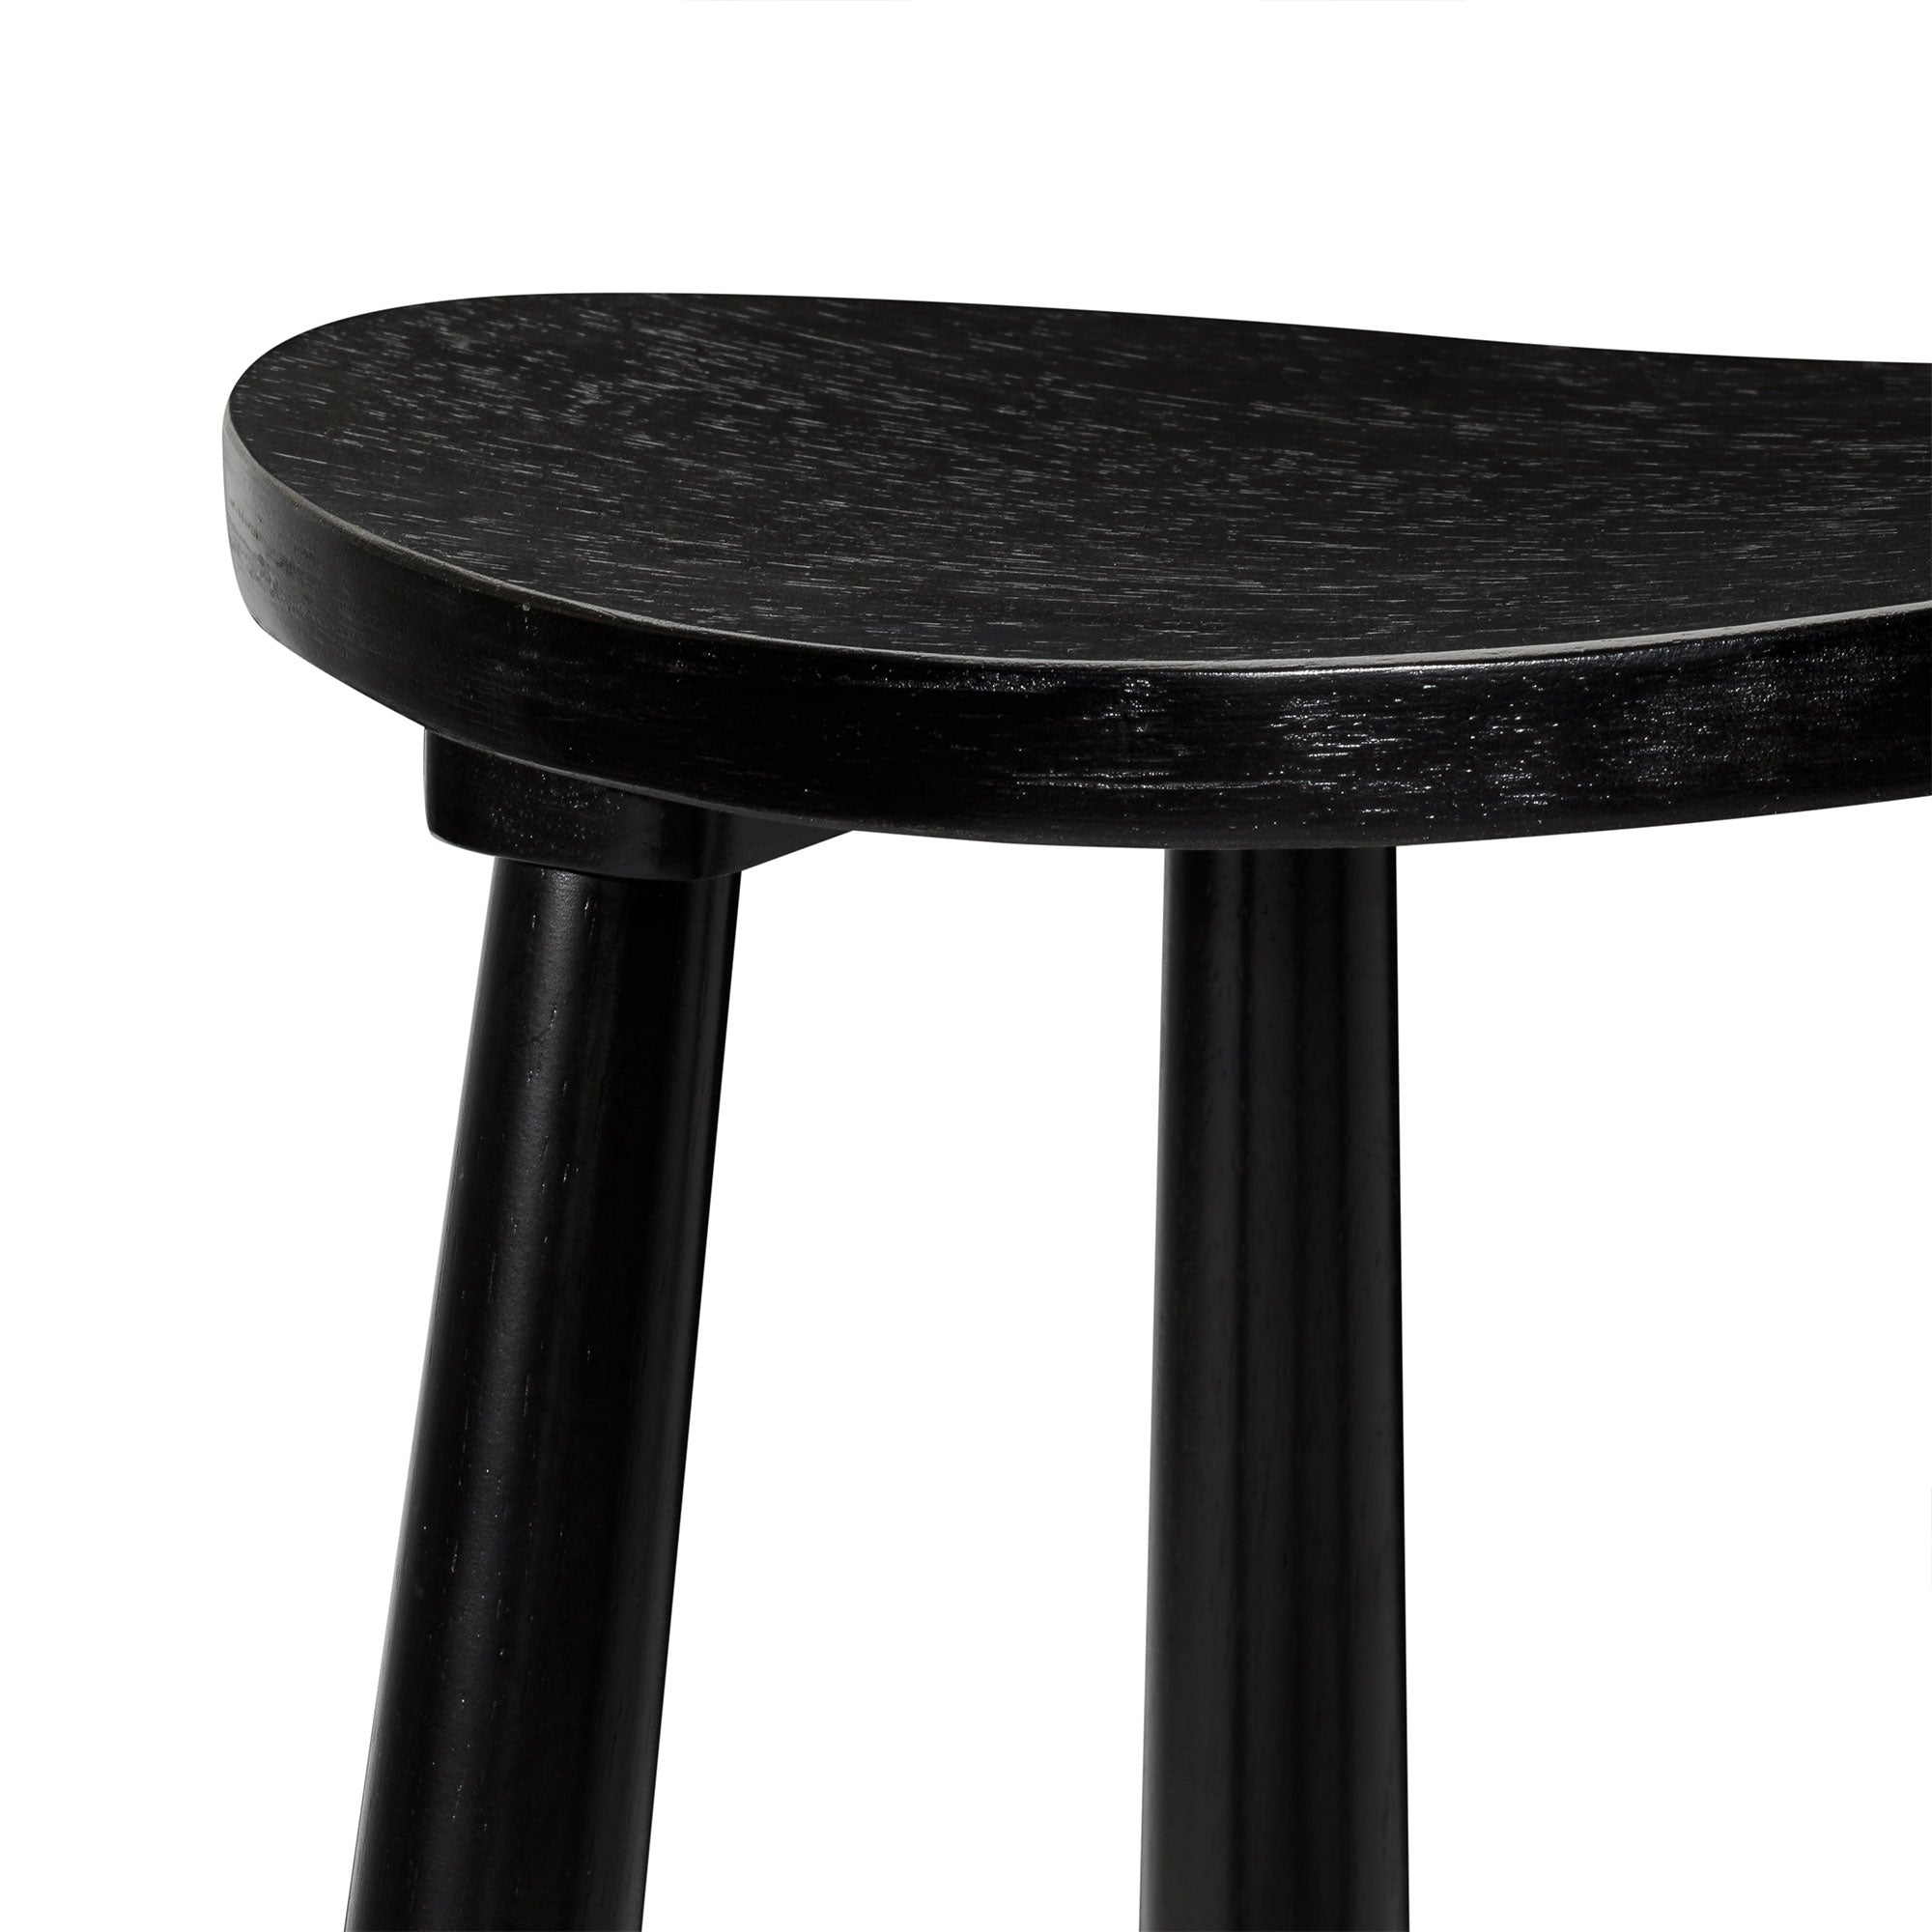 Luna Counter Stool in Rustic Black Wood Finish in Stools by Maven Lane